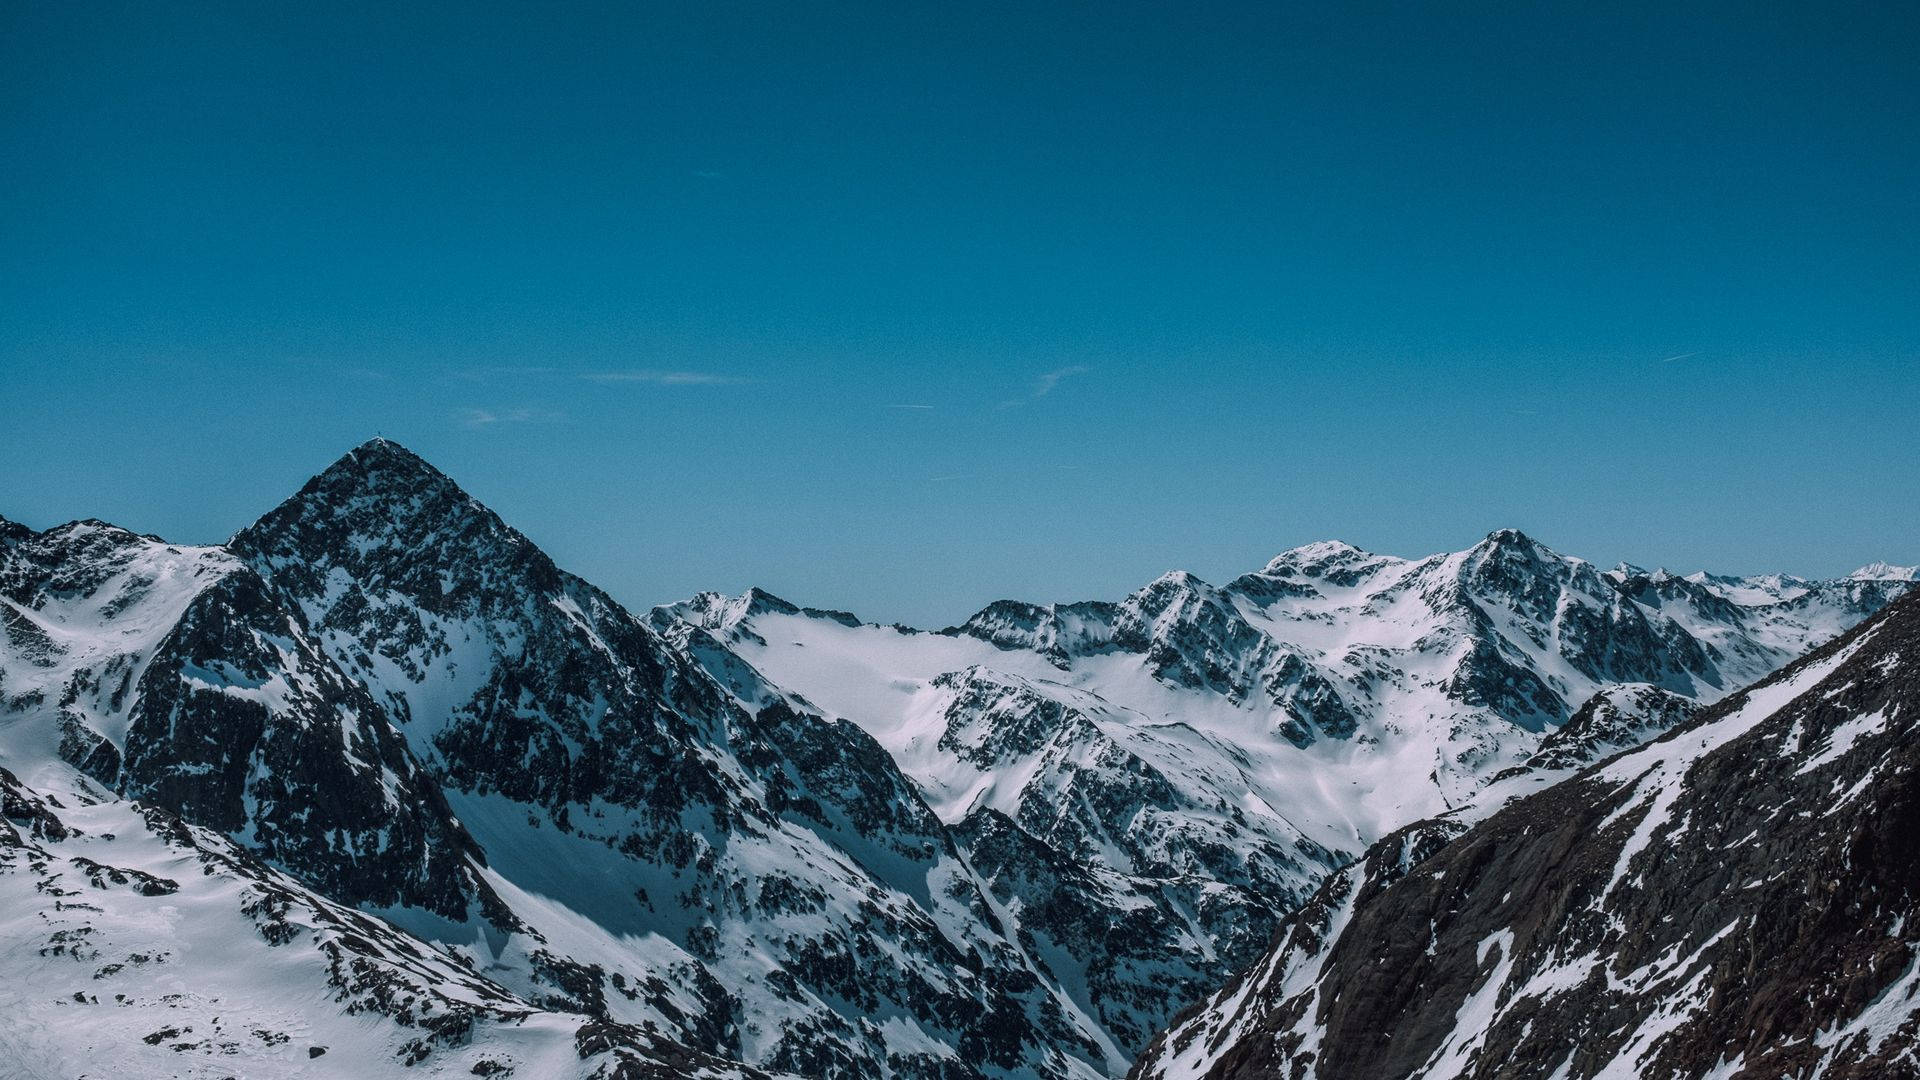 "Stubai Glacier - A Spectacle of Snow-Capped Mountains" Wallpaper